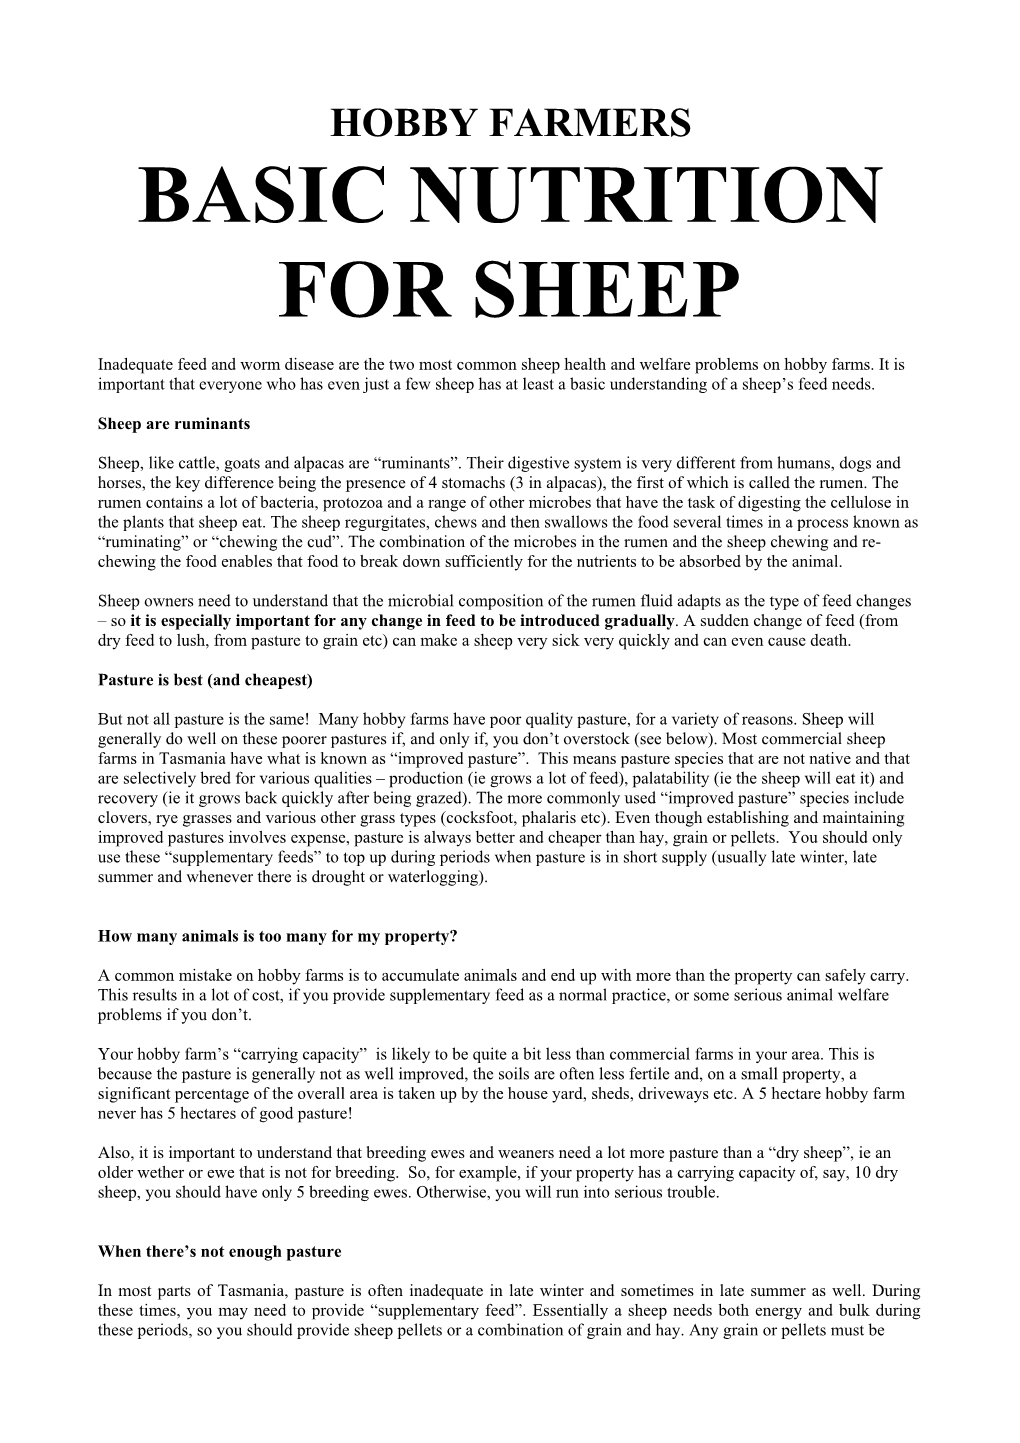 Basic Nutrition for Sheep